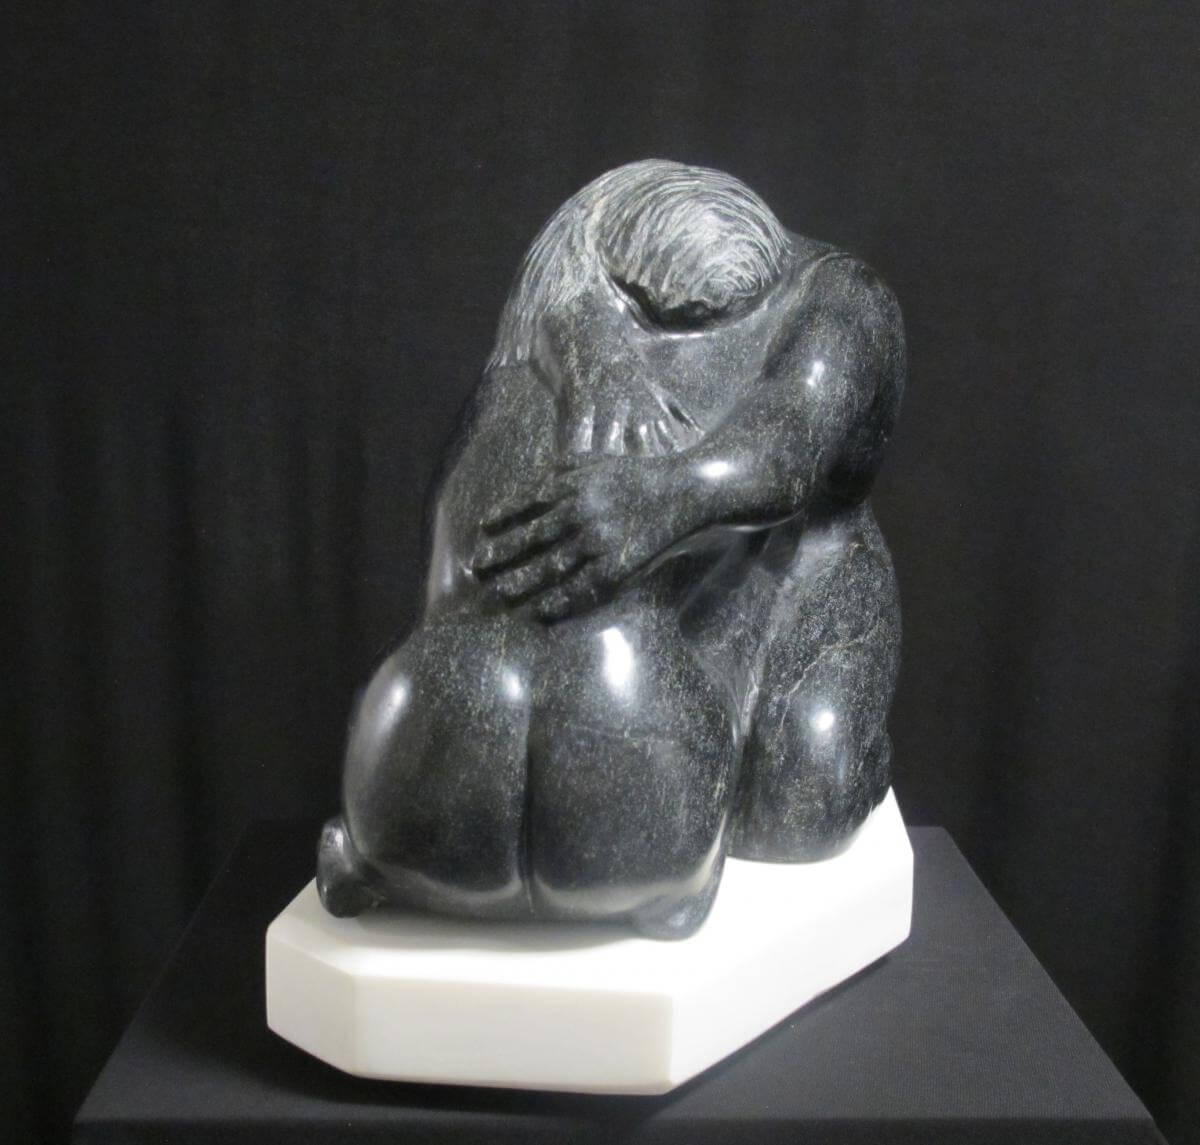 A sculpture of two monkeys sitting on top of a table.